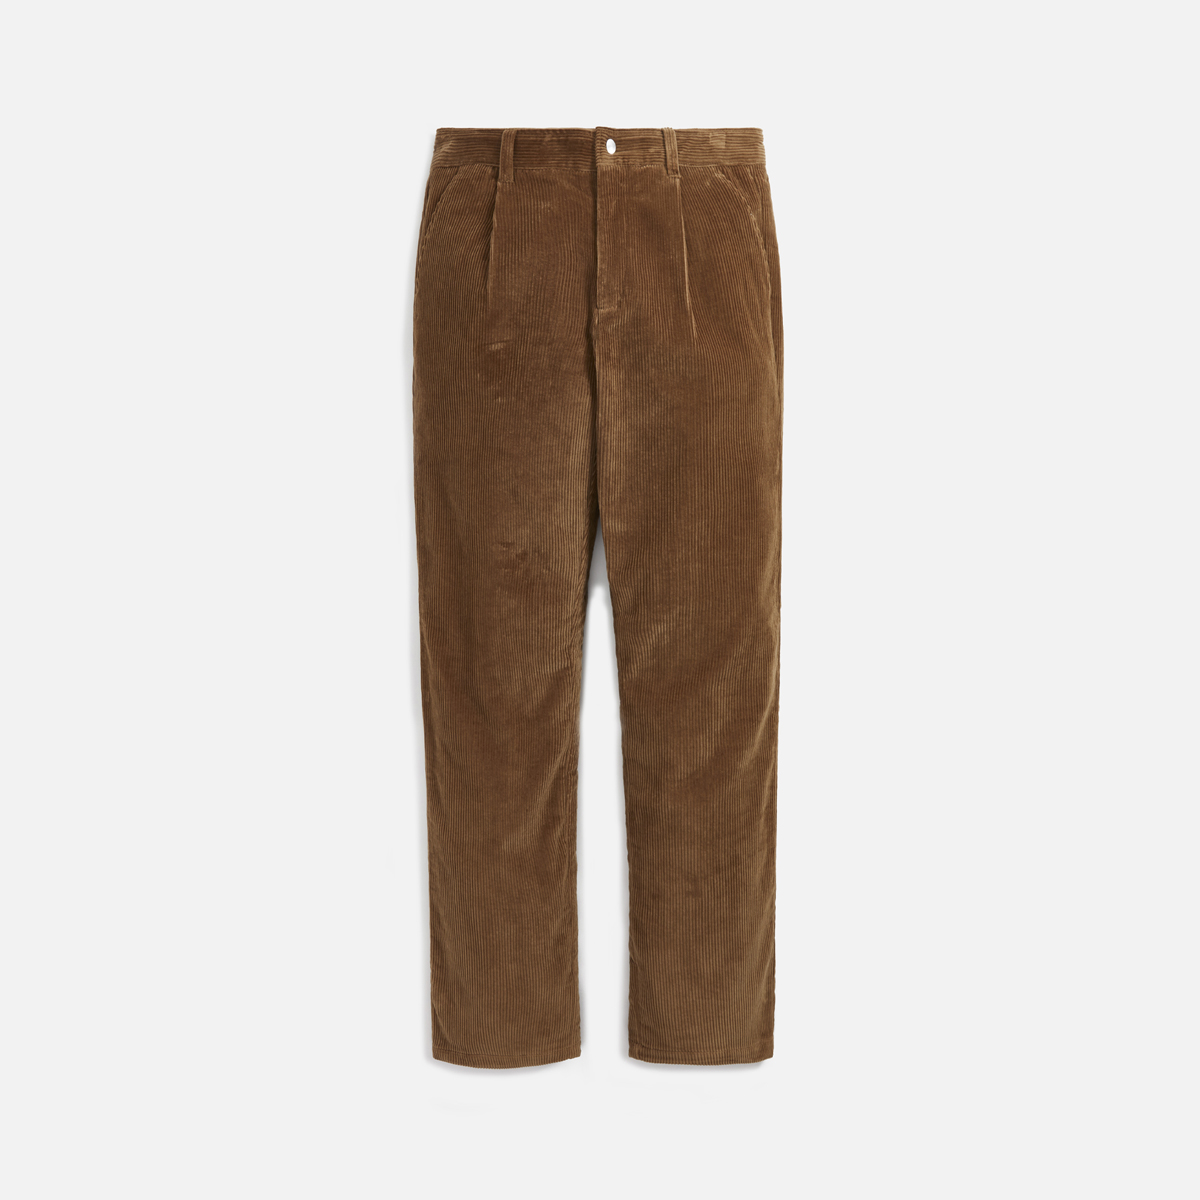 kith-fall-winter-2021-collection-bottoms-10